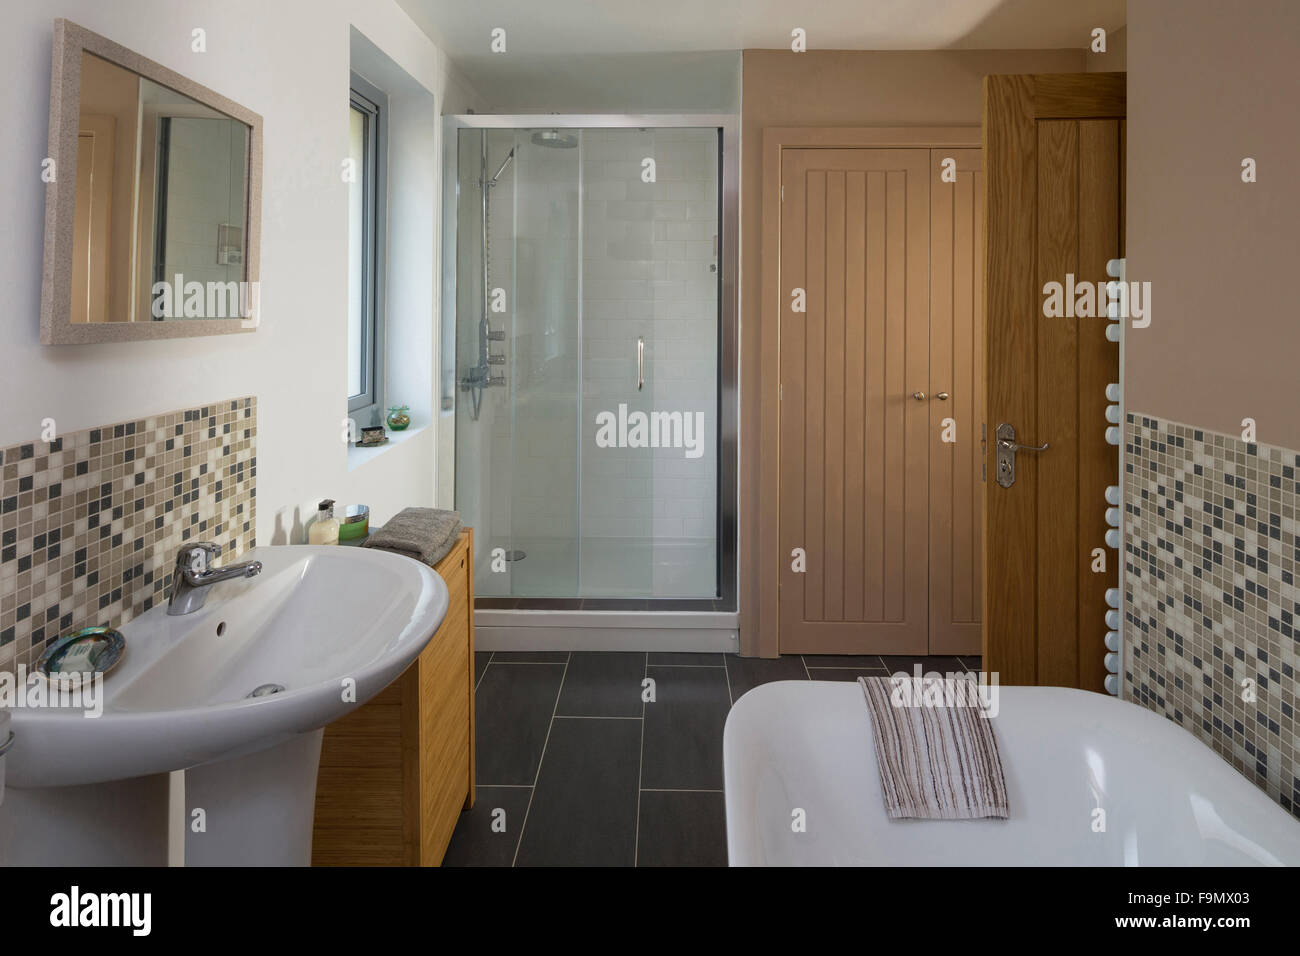 Family bathroom in a moder house, with a traditional bath, handbasin and toilet. Stock Photo